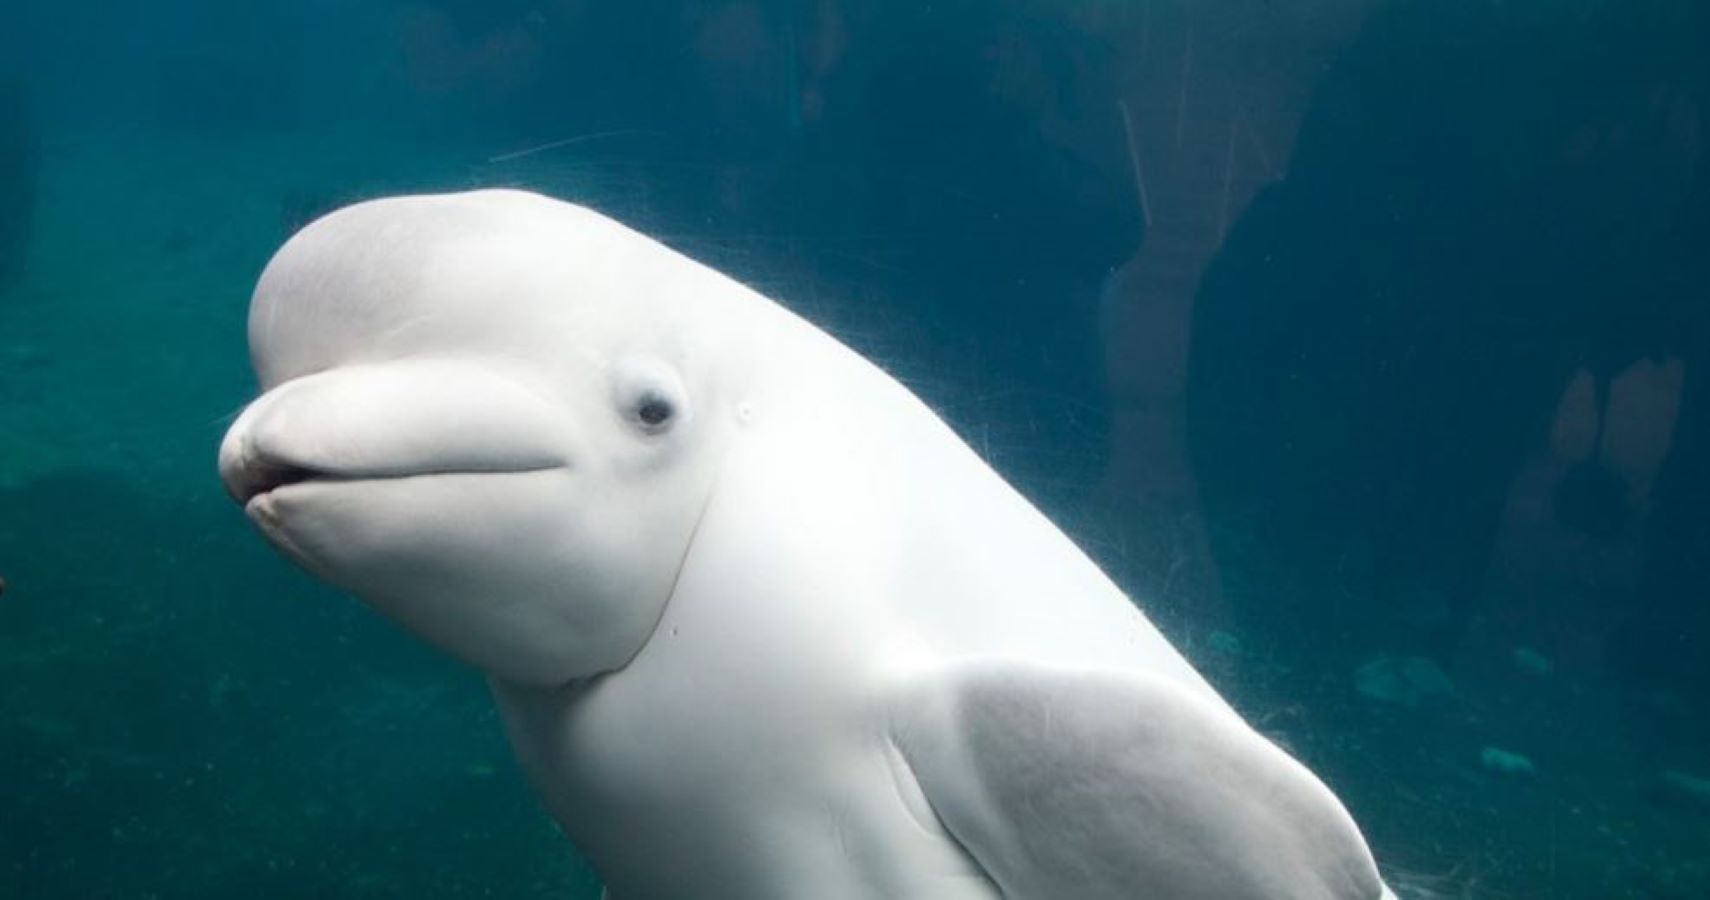 Watch: Toddler Gets Scared By Beluga Whale In Adorable Video